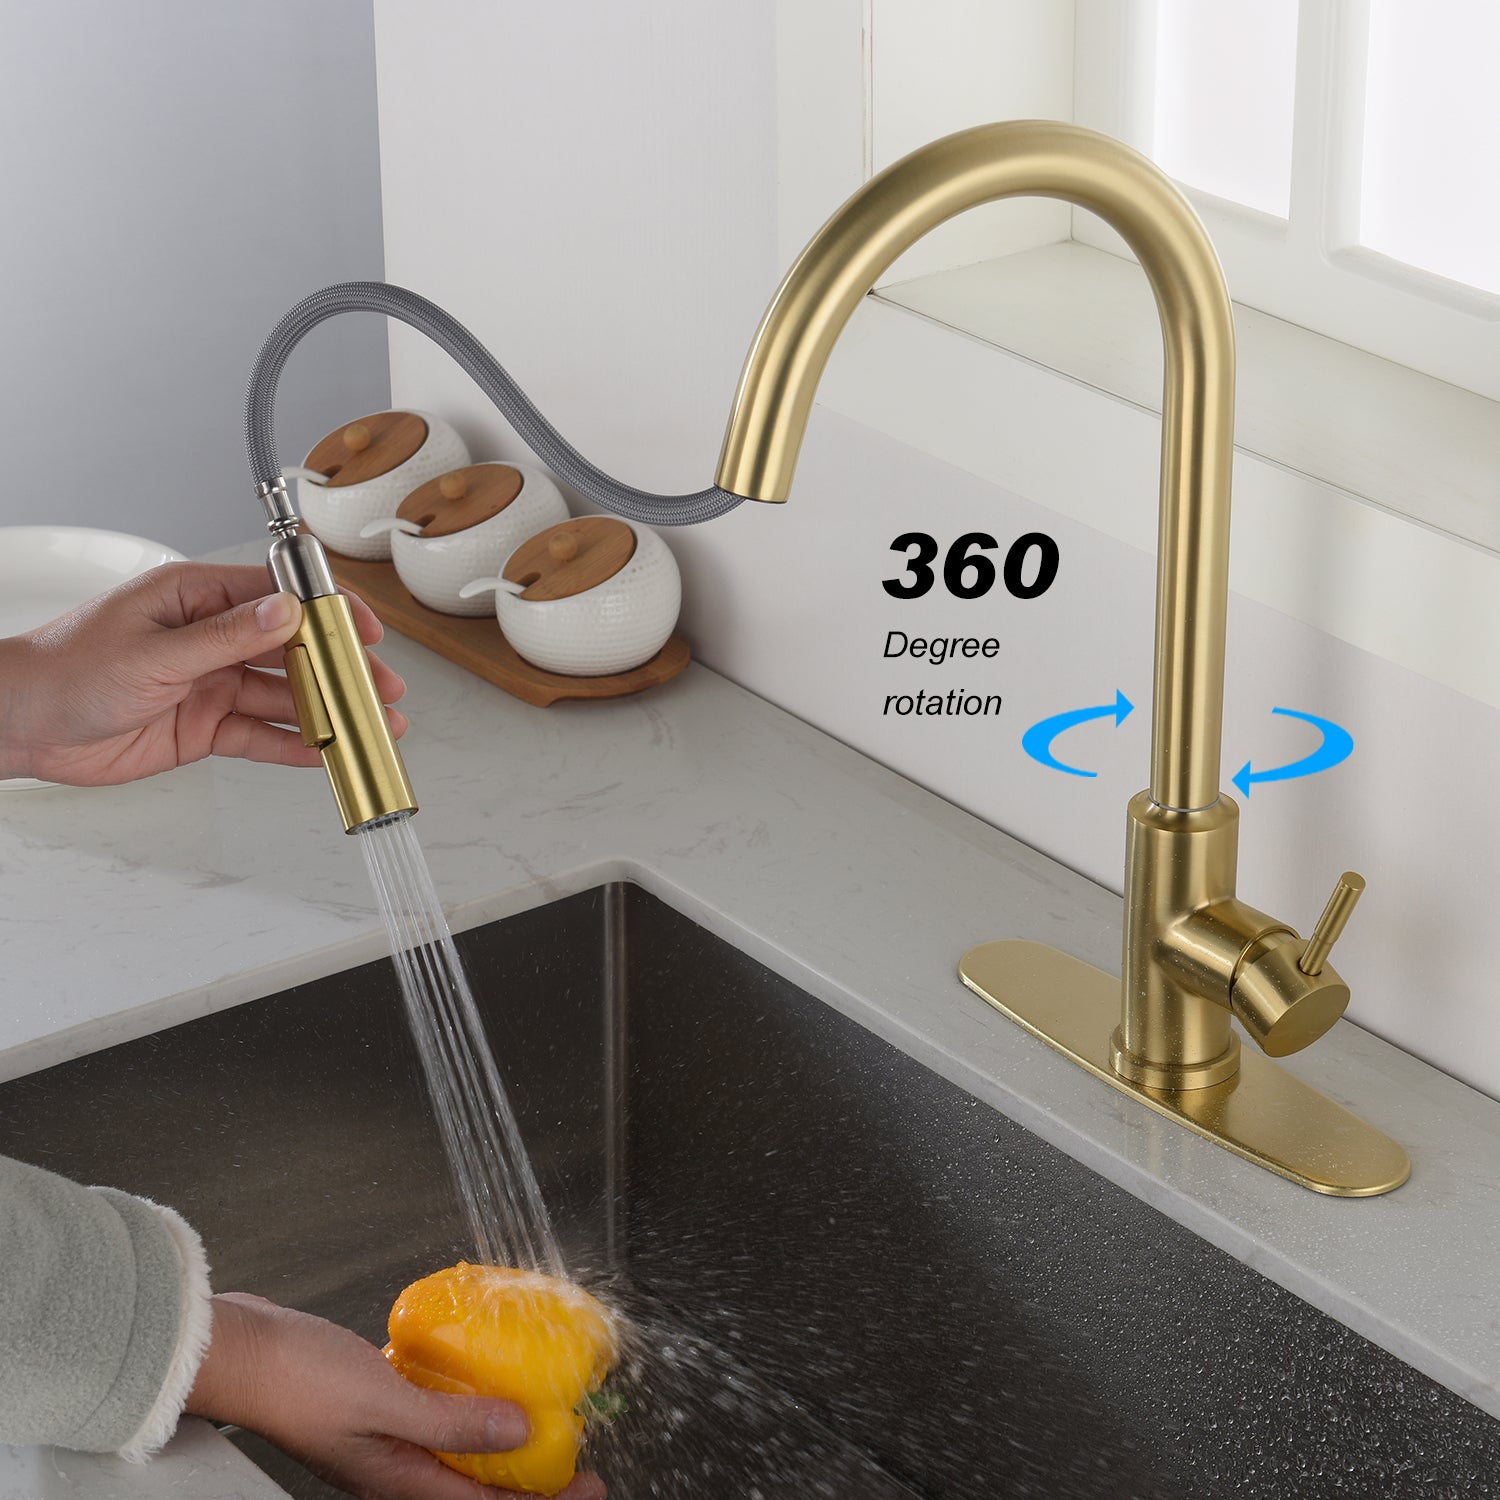 Touch Kitchen Faucet with Pull Down Sprayer - Gold